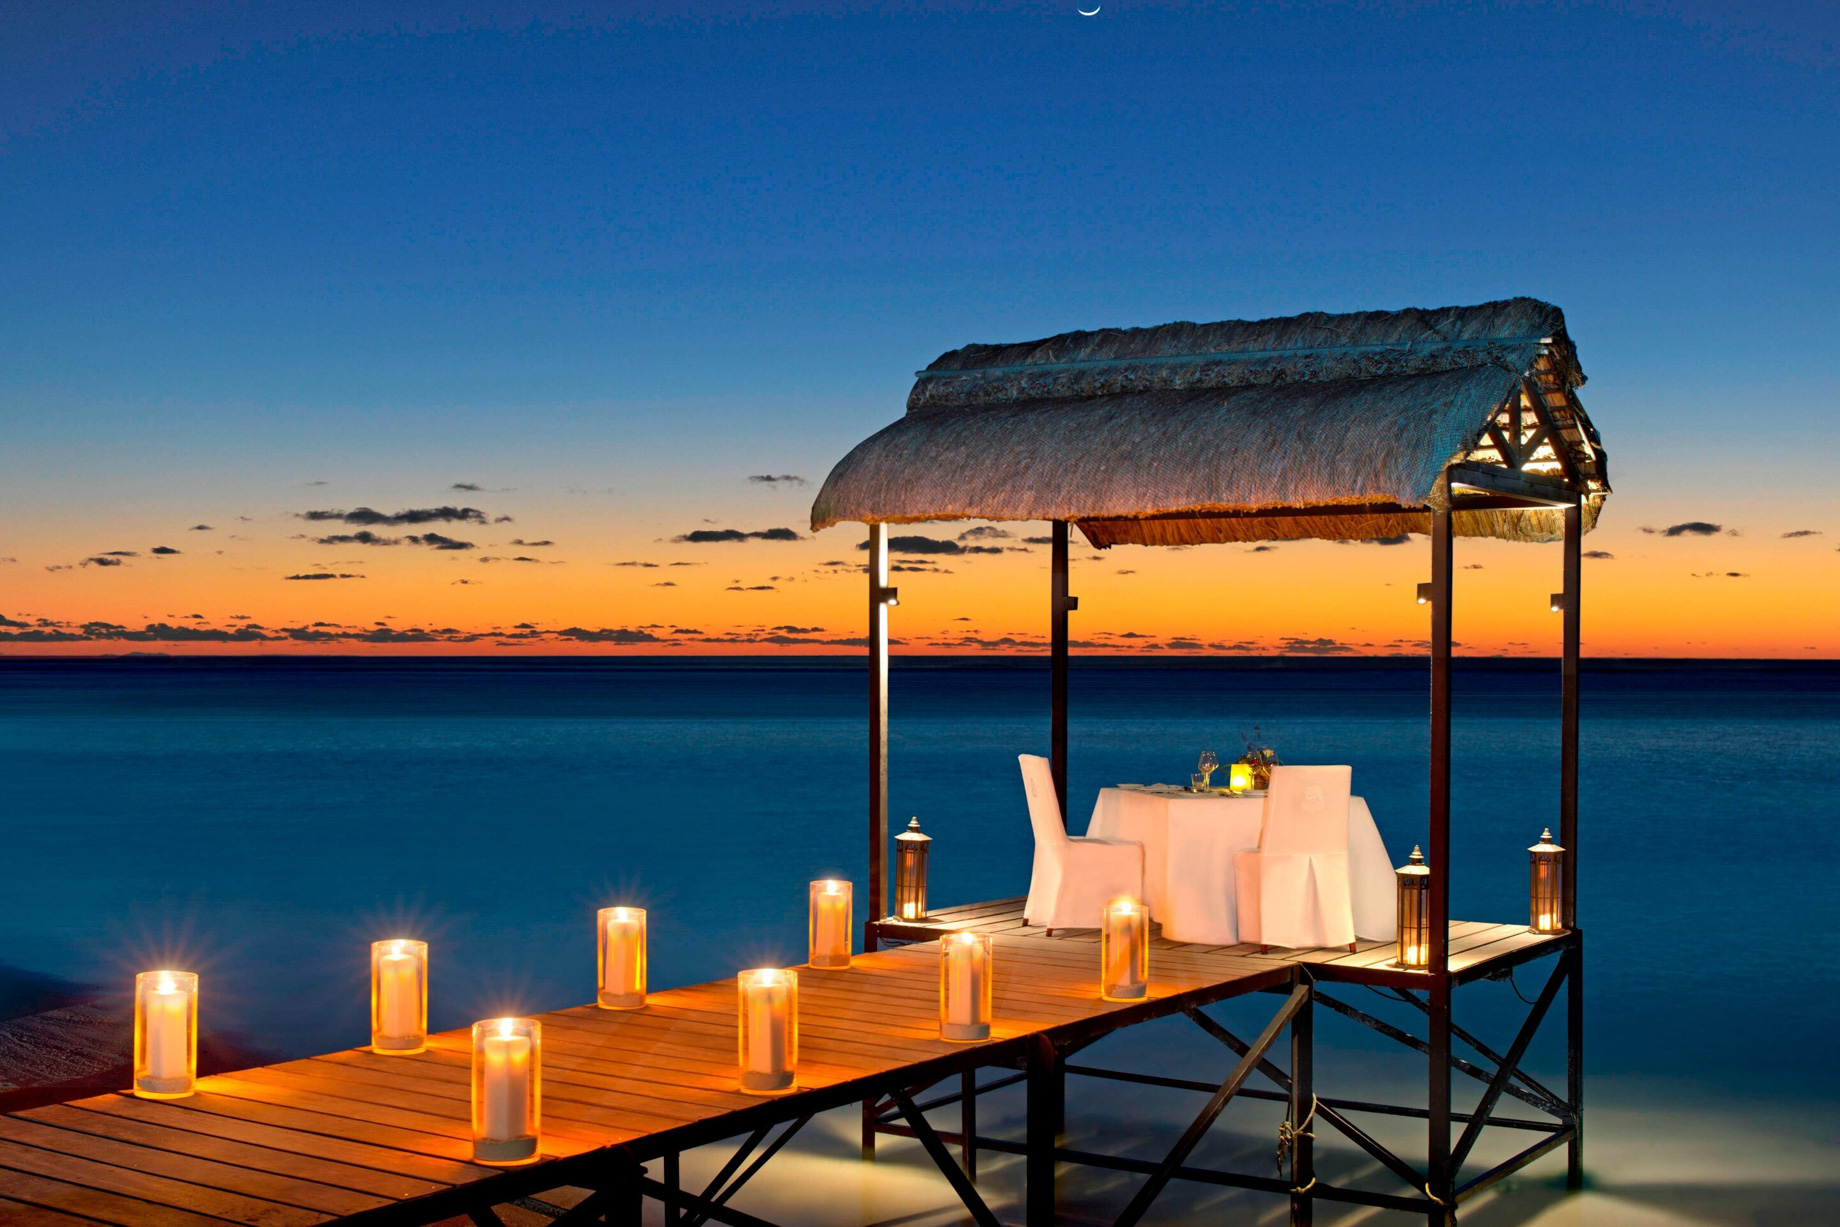 JW Marriott Mauritius Resort – Mauritius – Private Dining on the Jetty at Night